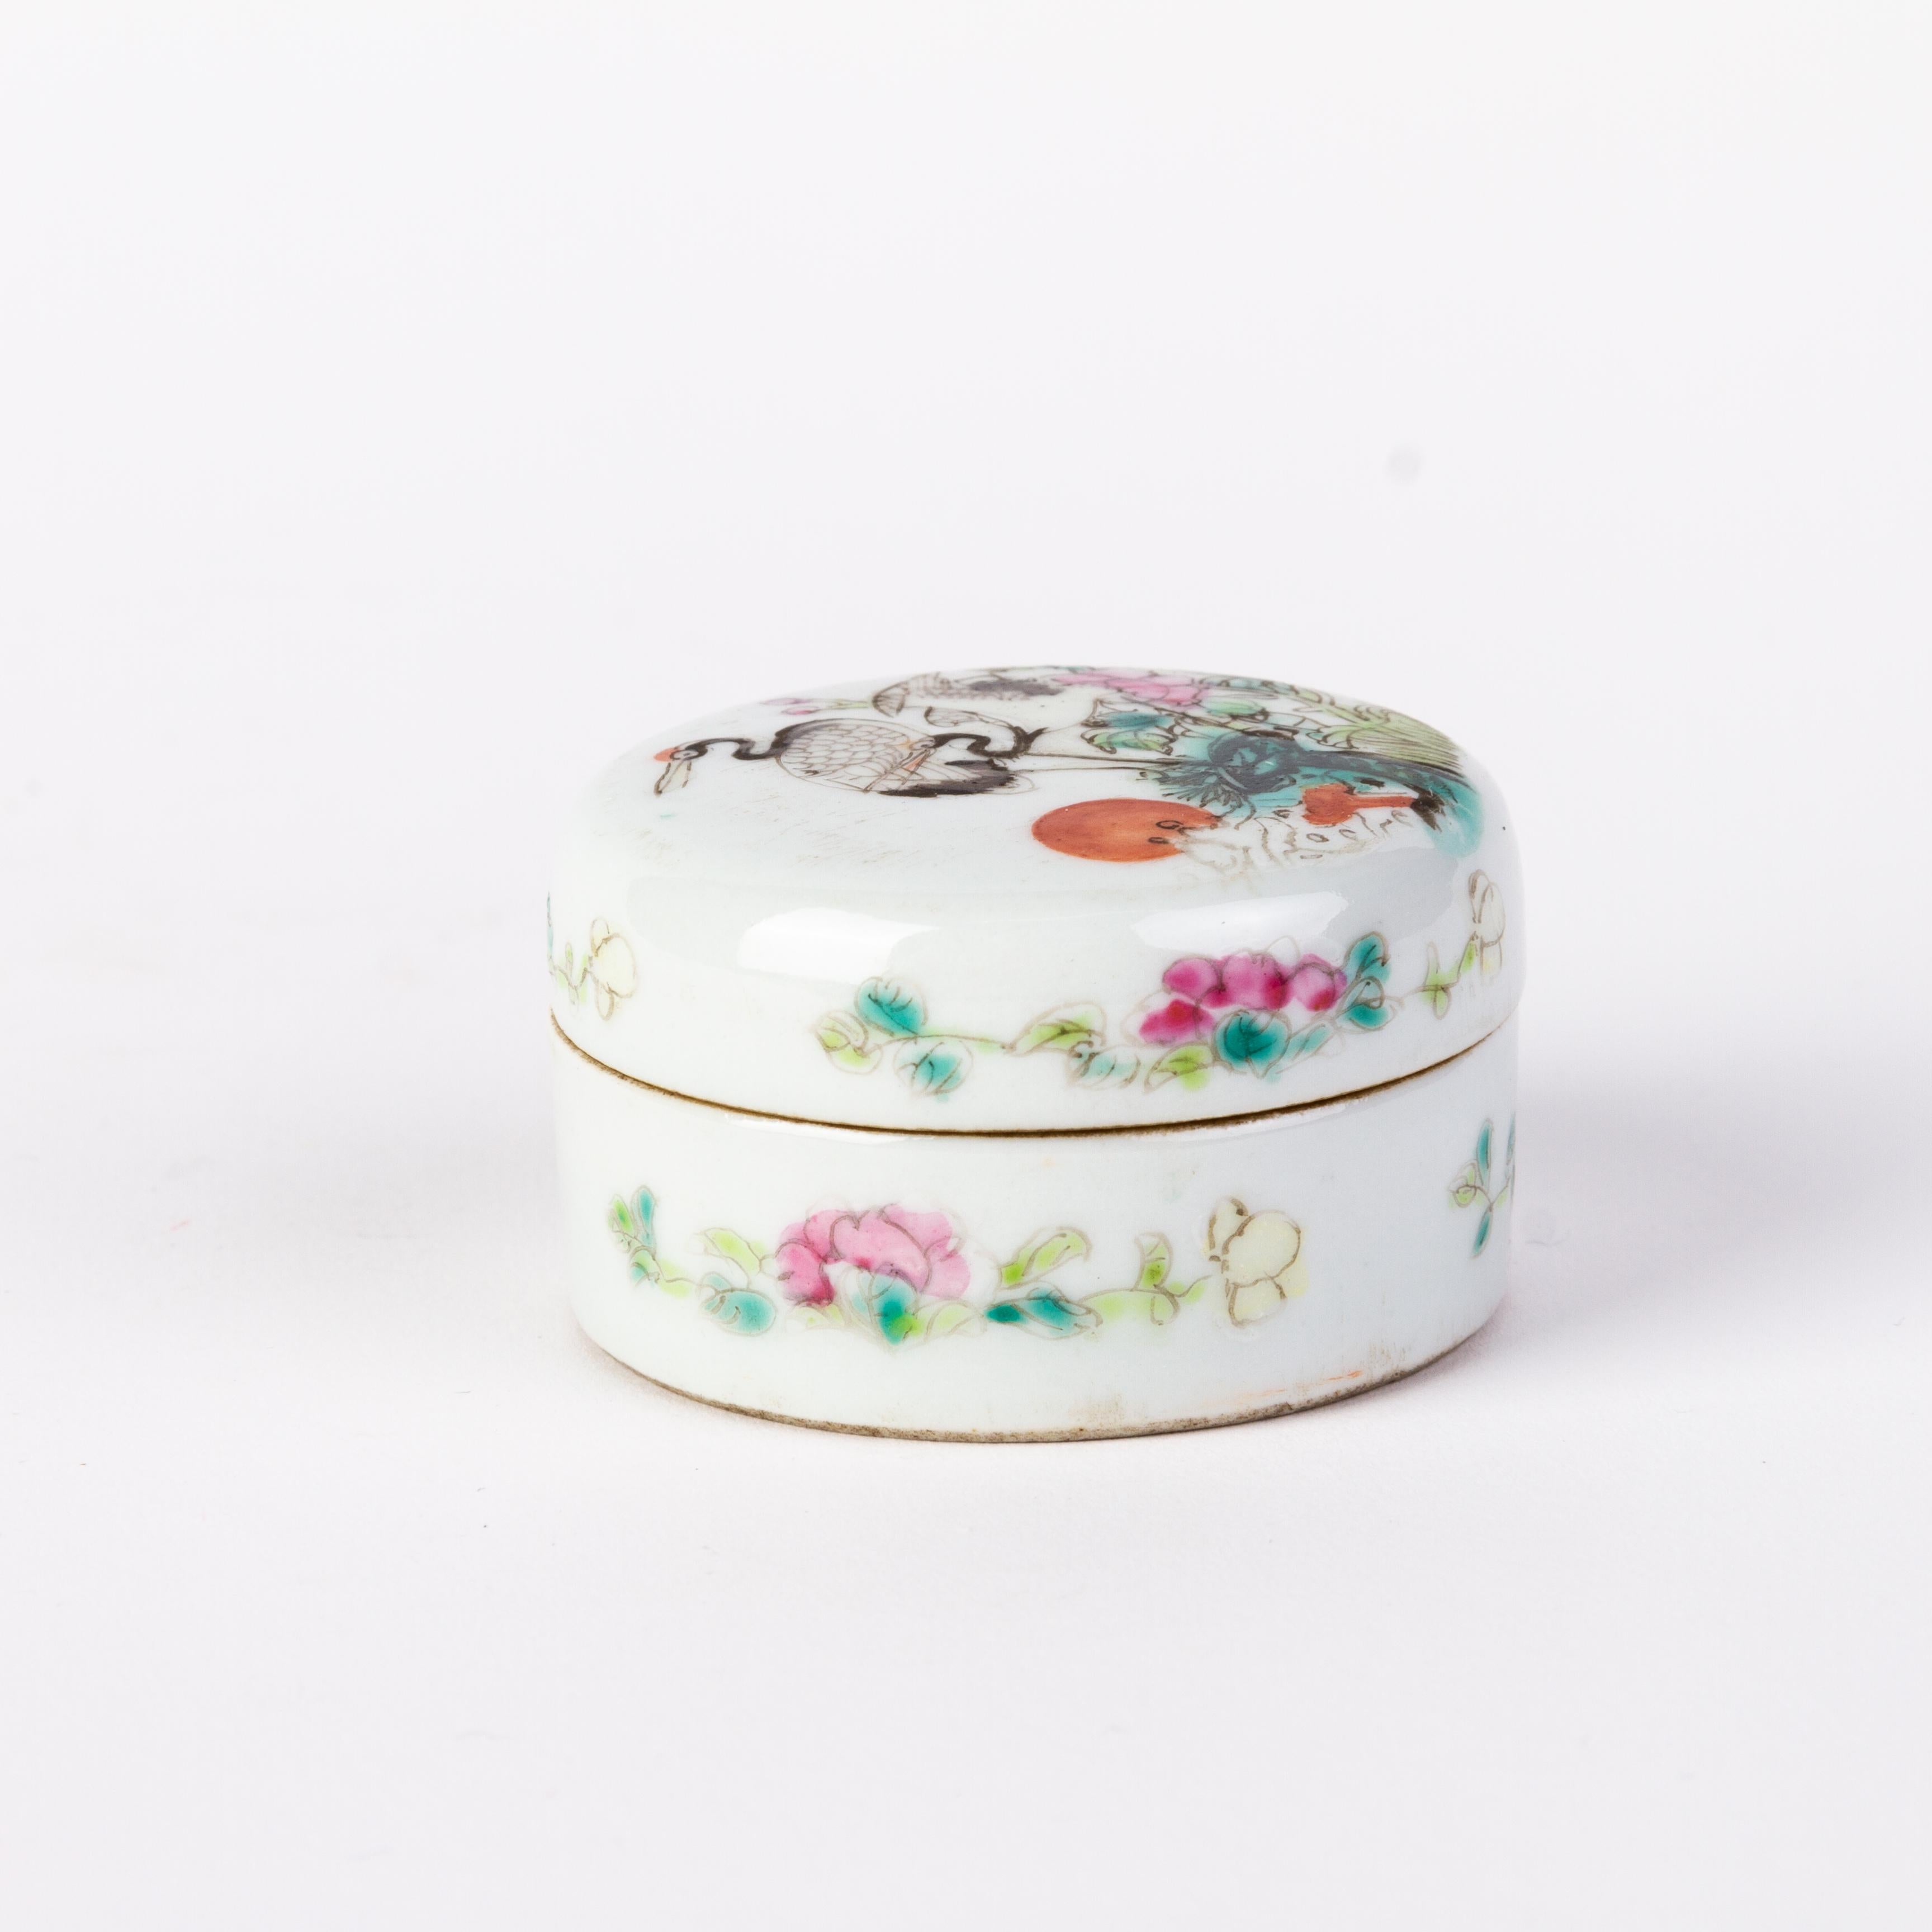 Chinese Guangxu Porcelain Lidded Paste Box 19th Century 
Good condition overall with 6 character seal mark on base
From a private collection.
Free international shipping.